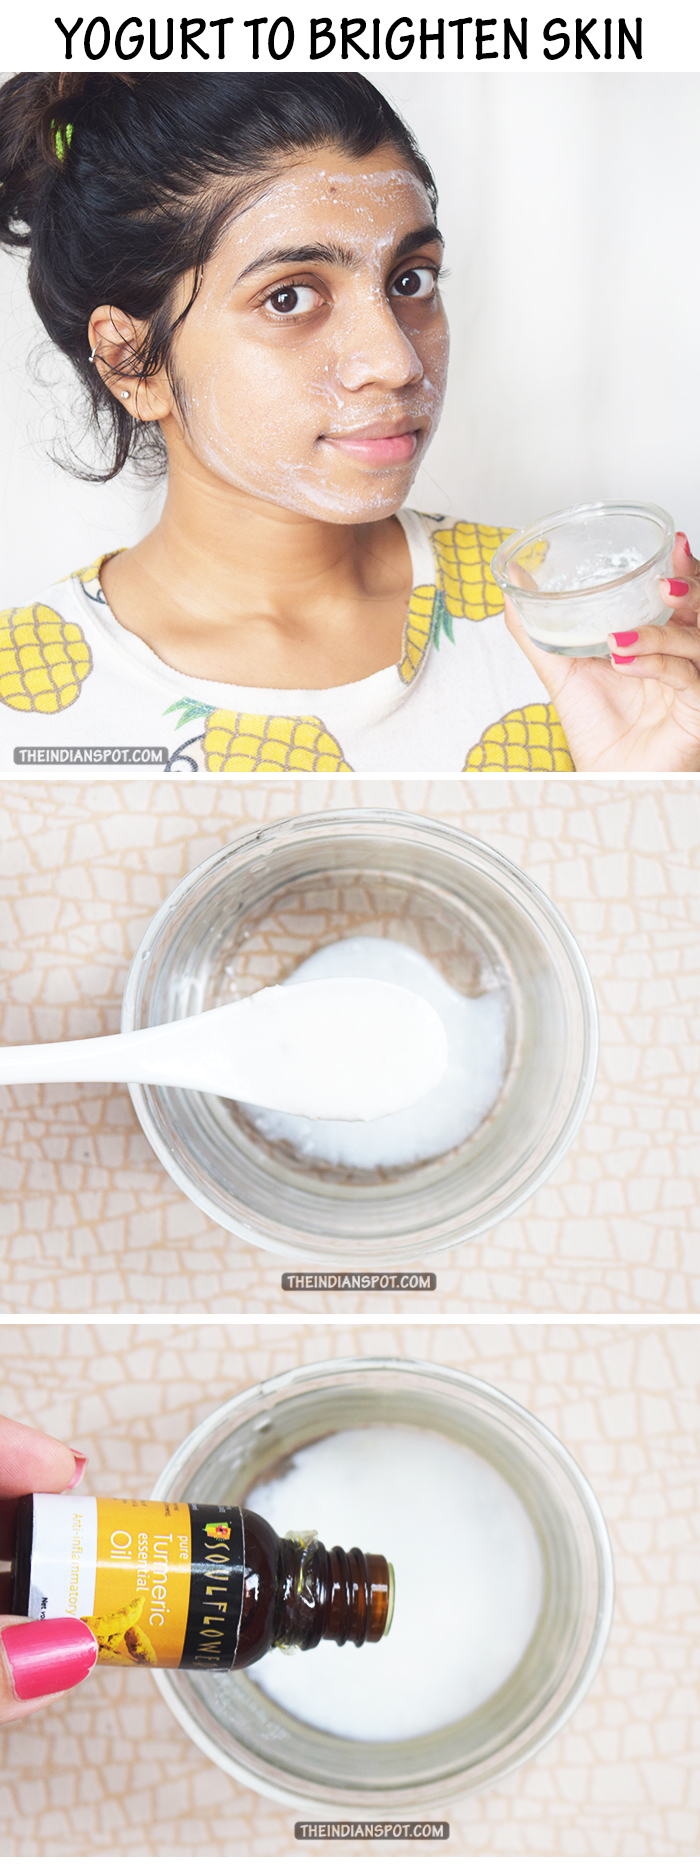 BRIGHTEN YOUR SKIN INSTANTLY WITH YOGURT FACE MASK